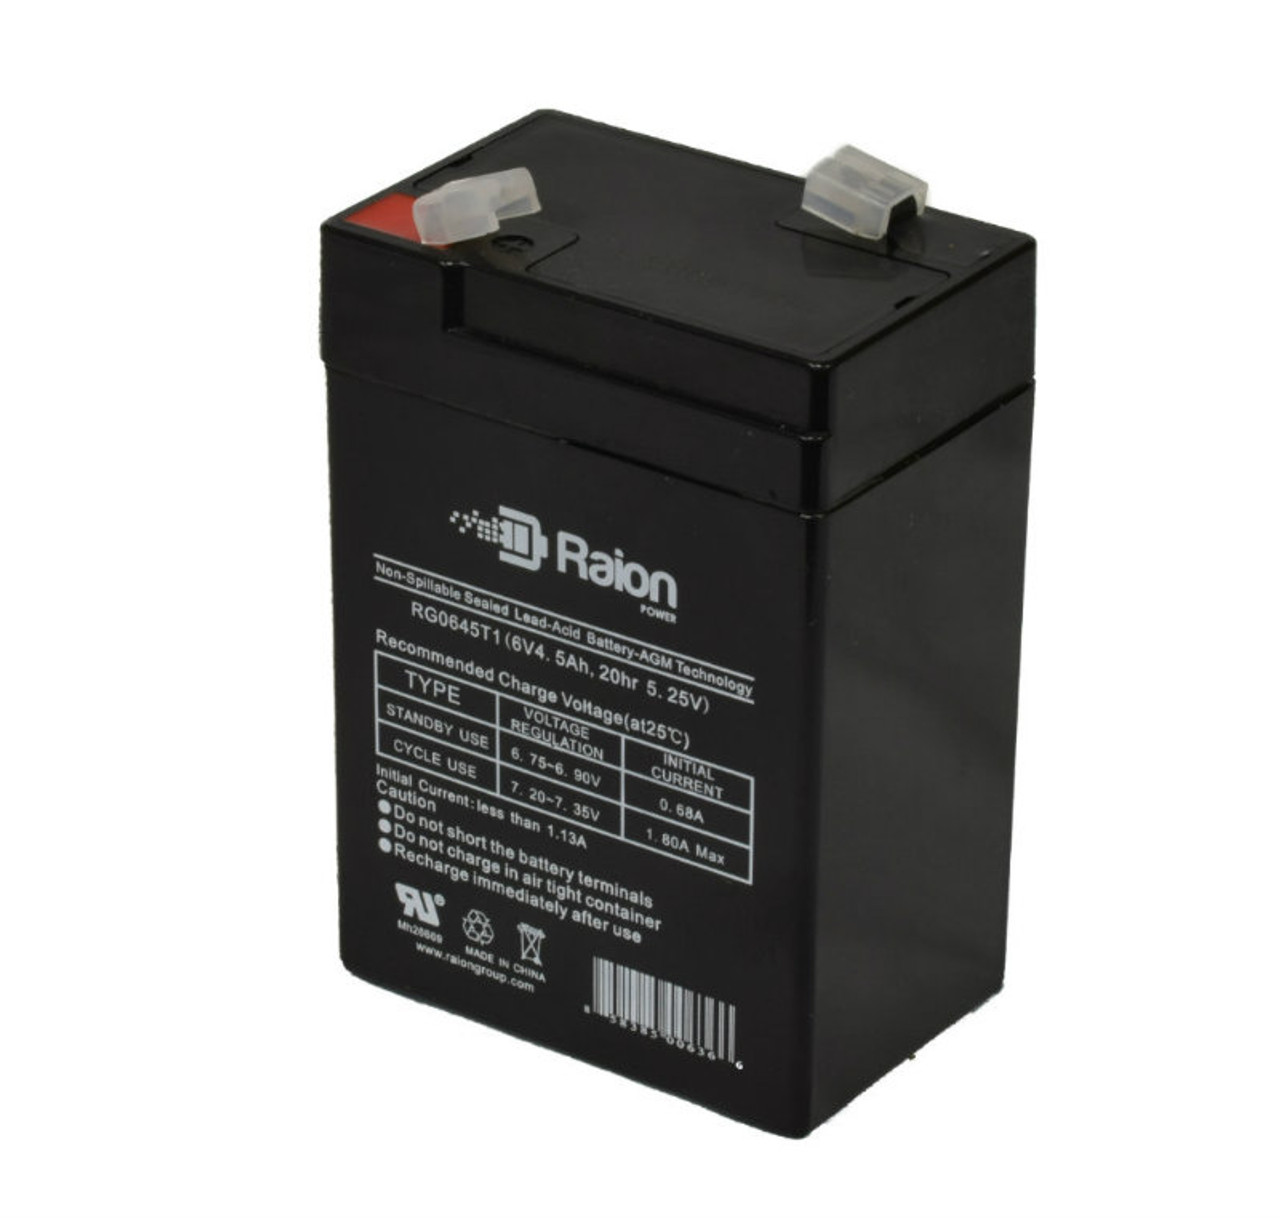 Raion Power RG0645T1 6V 4.5Ah Replacement Battery Cartridge for LONG WP4-6V0